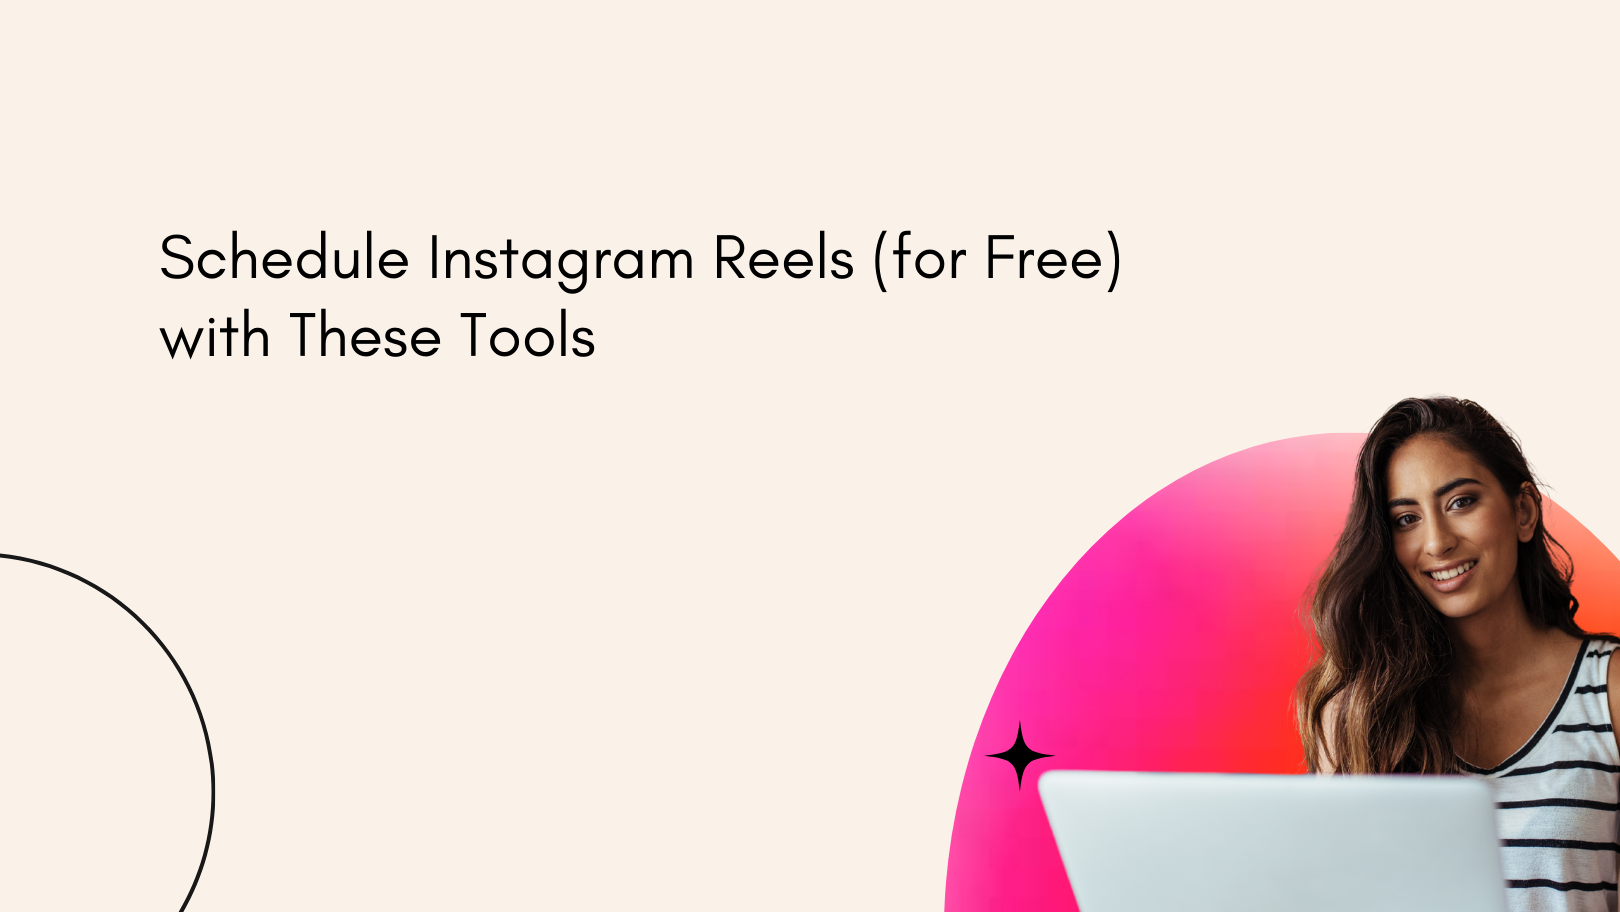 AV_schedule-instagram-reels-for-free-with-these-tools